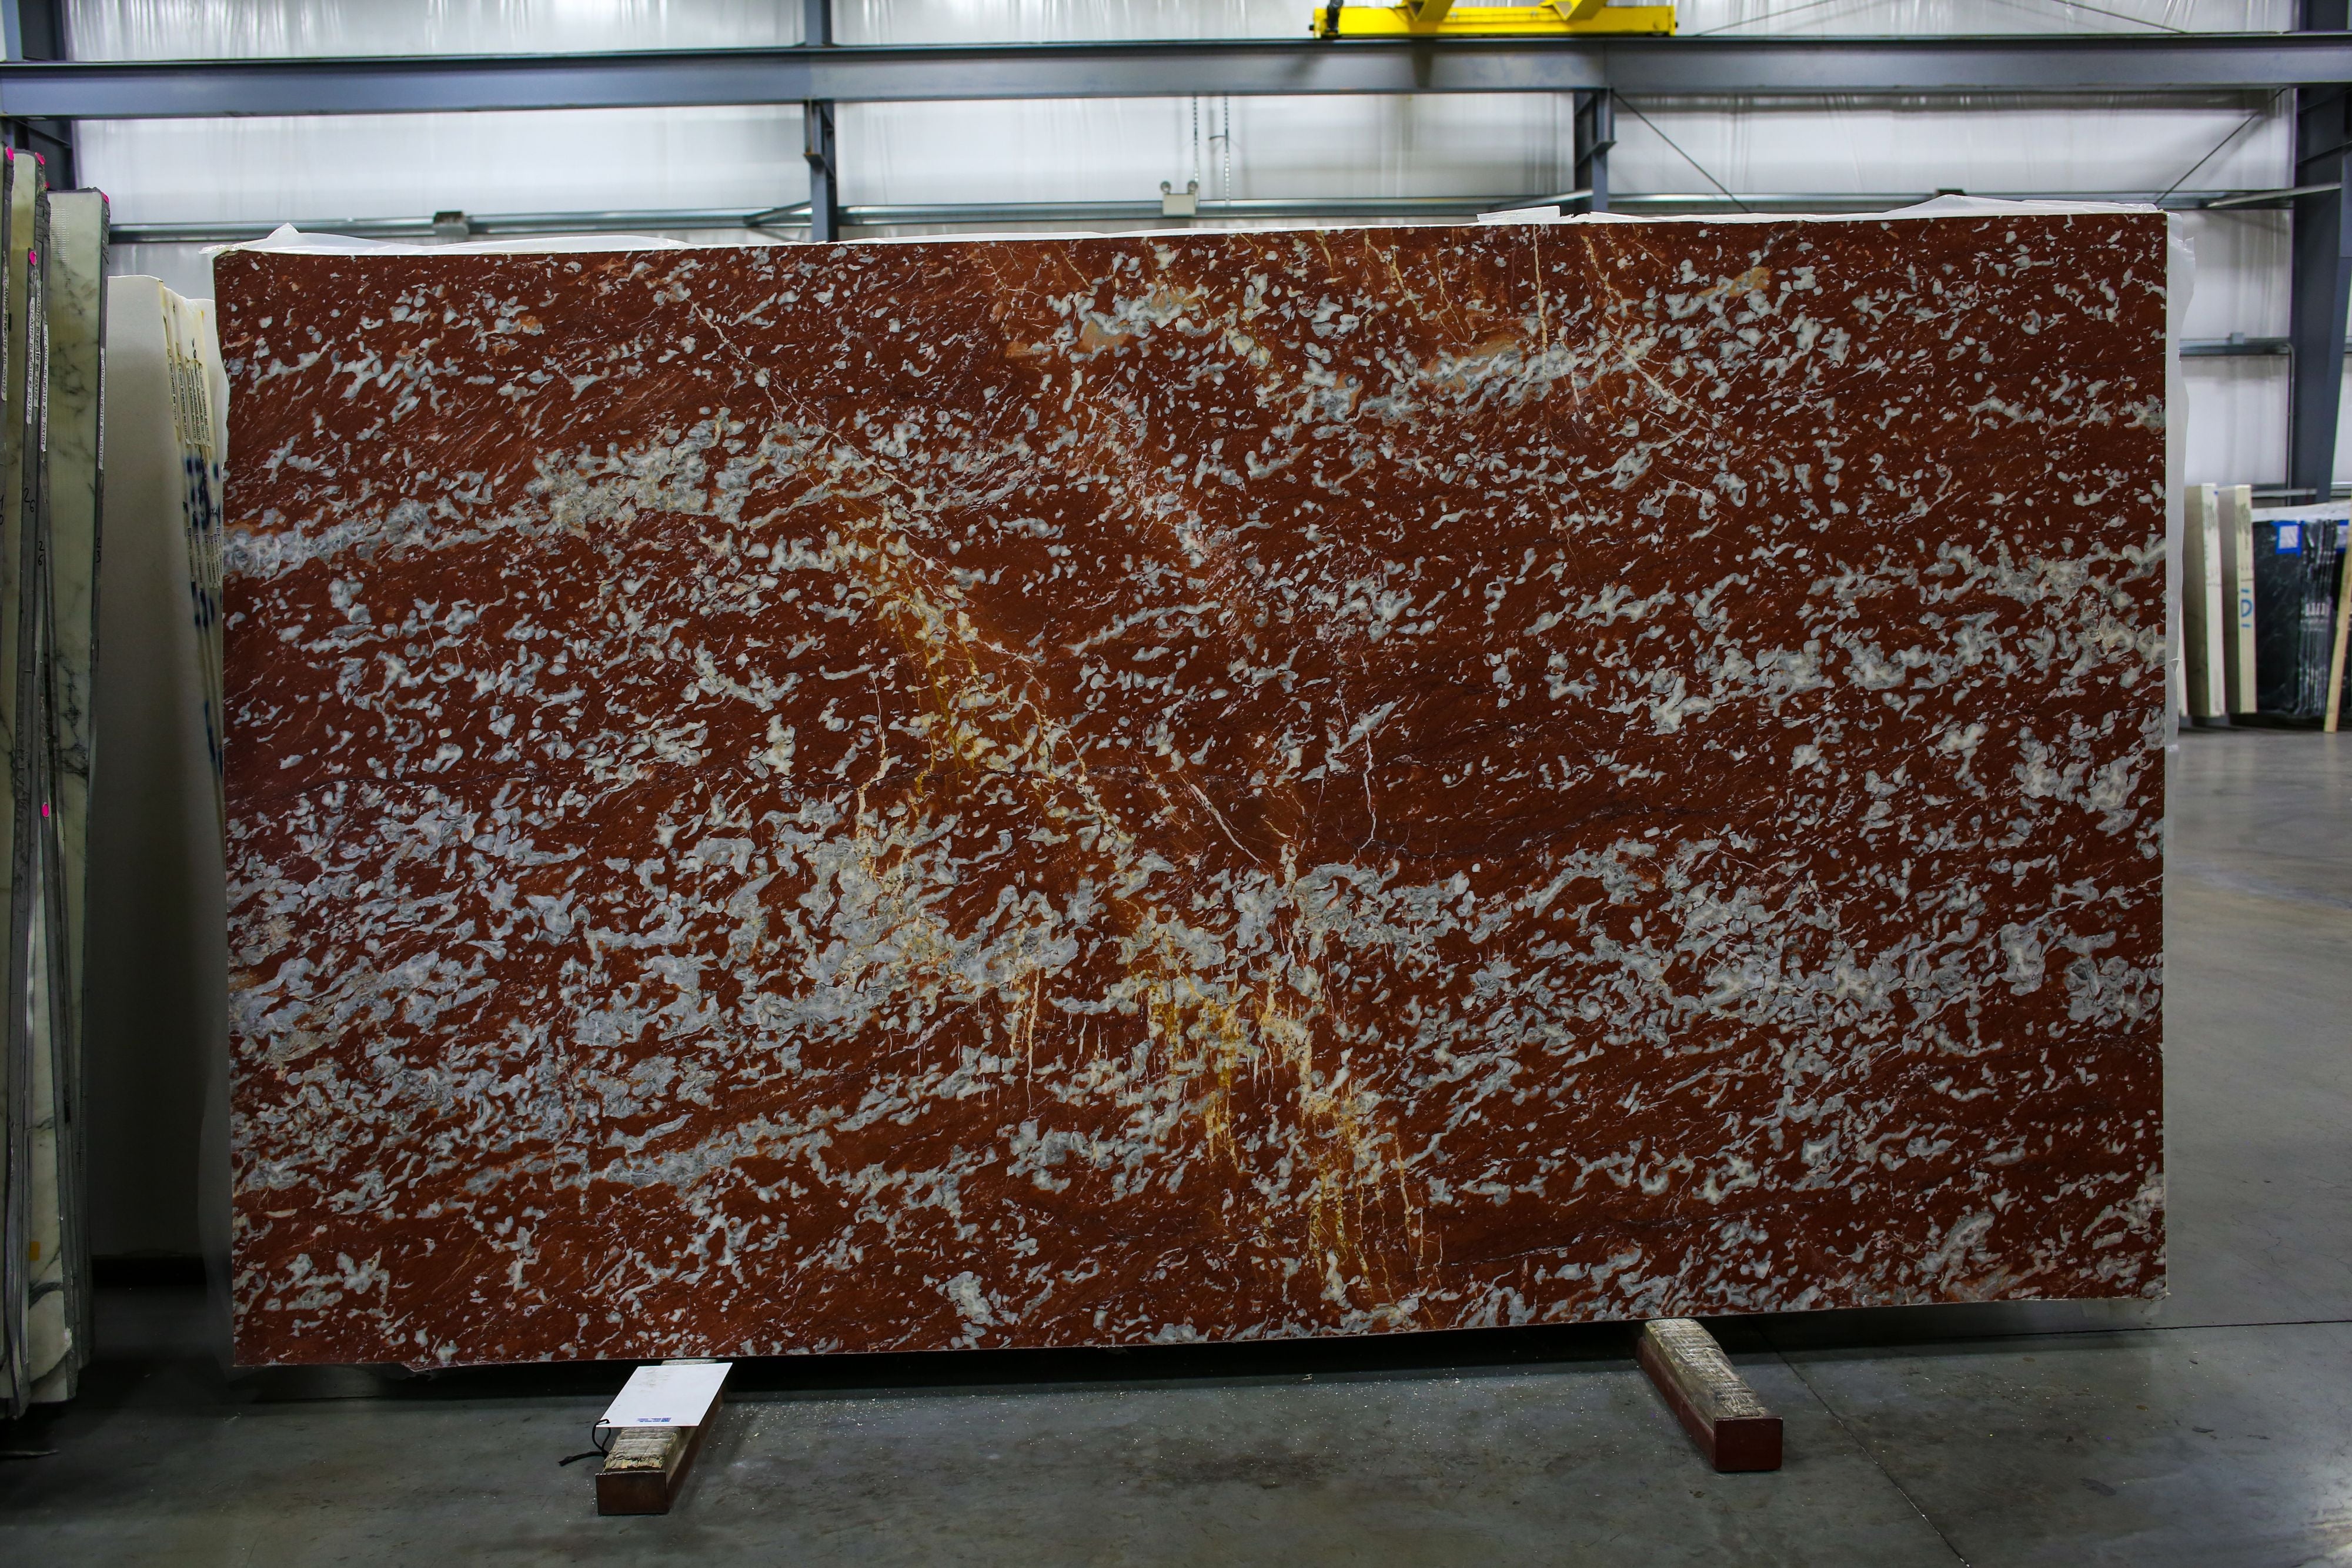  Rosso%20Francia%20Marble%20Slab%203/4%22%20%20Honed%20Stone - 55190#09 -  71X112 